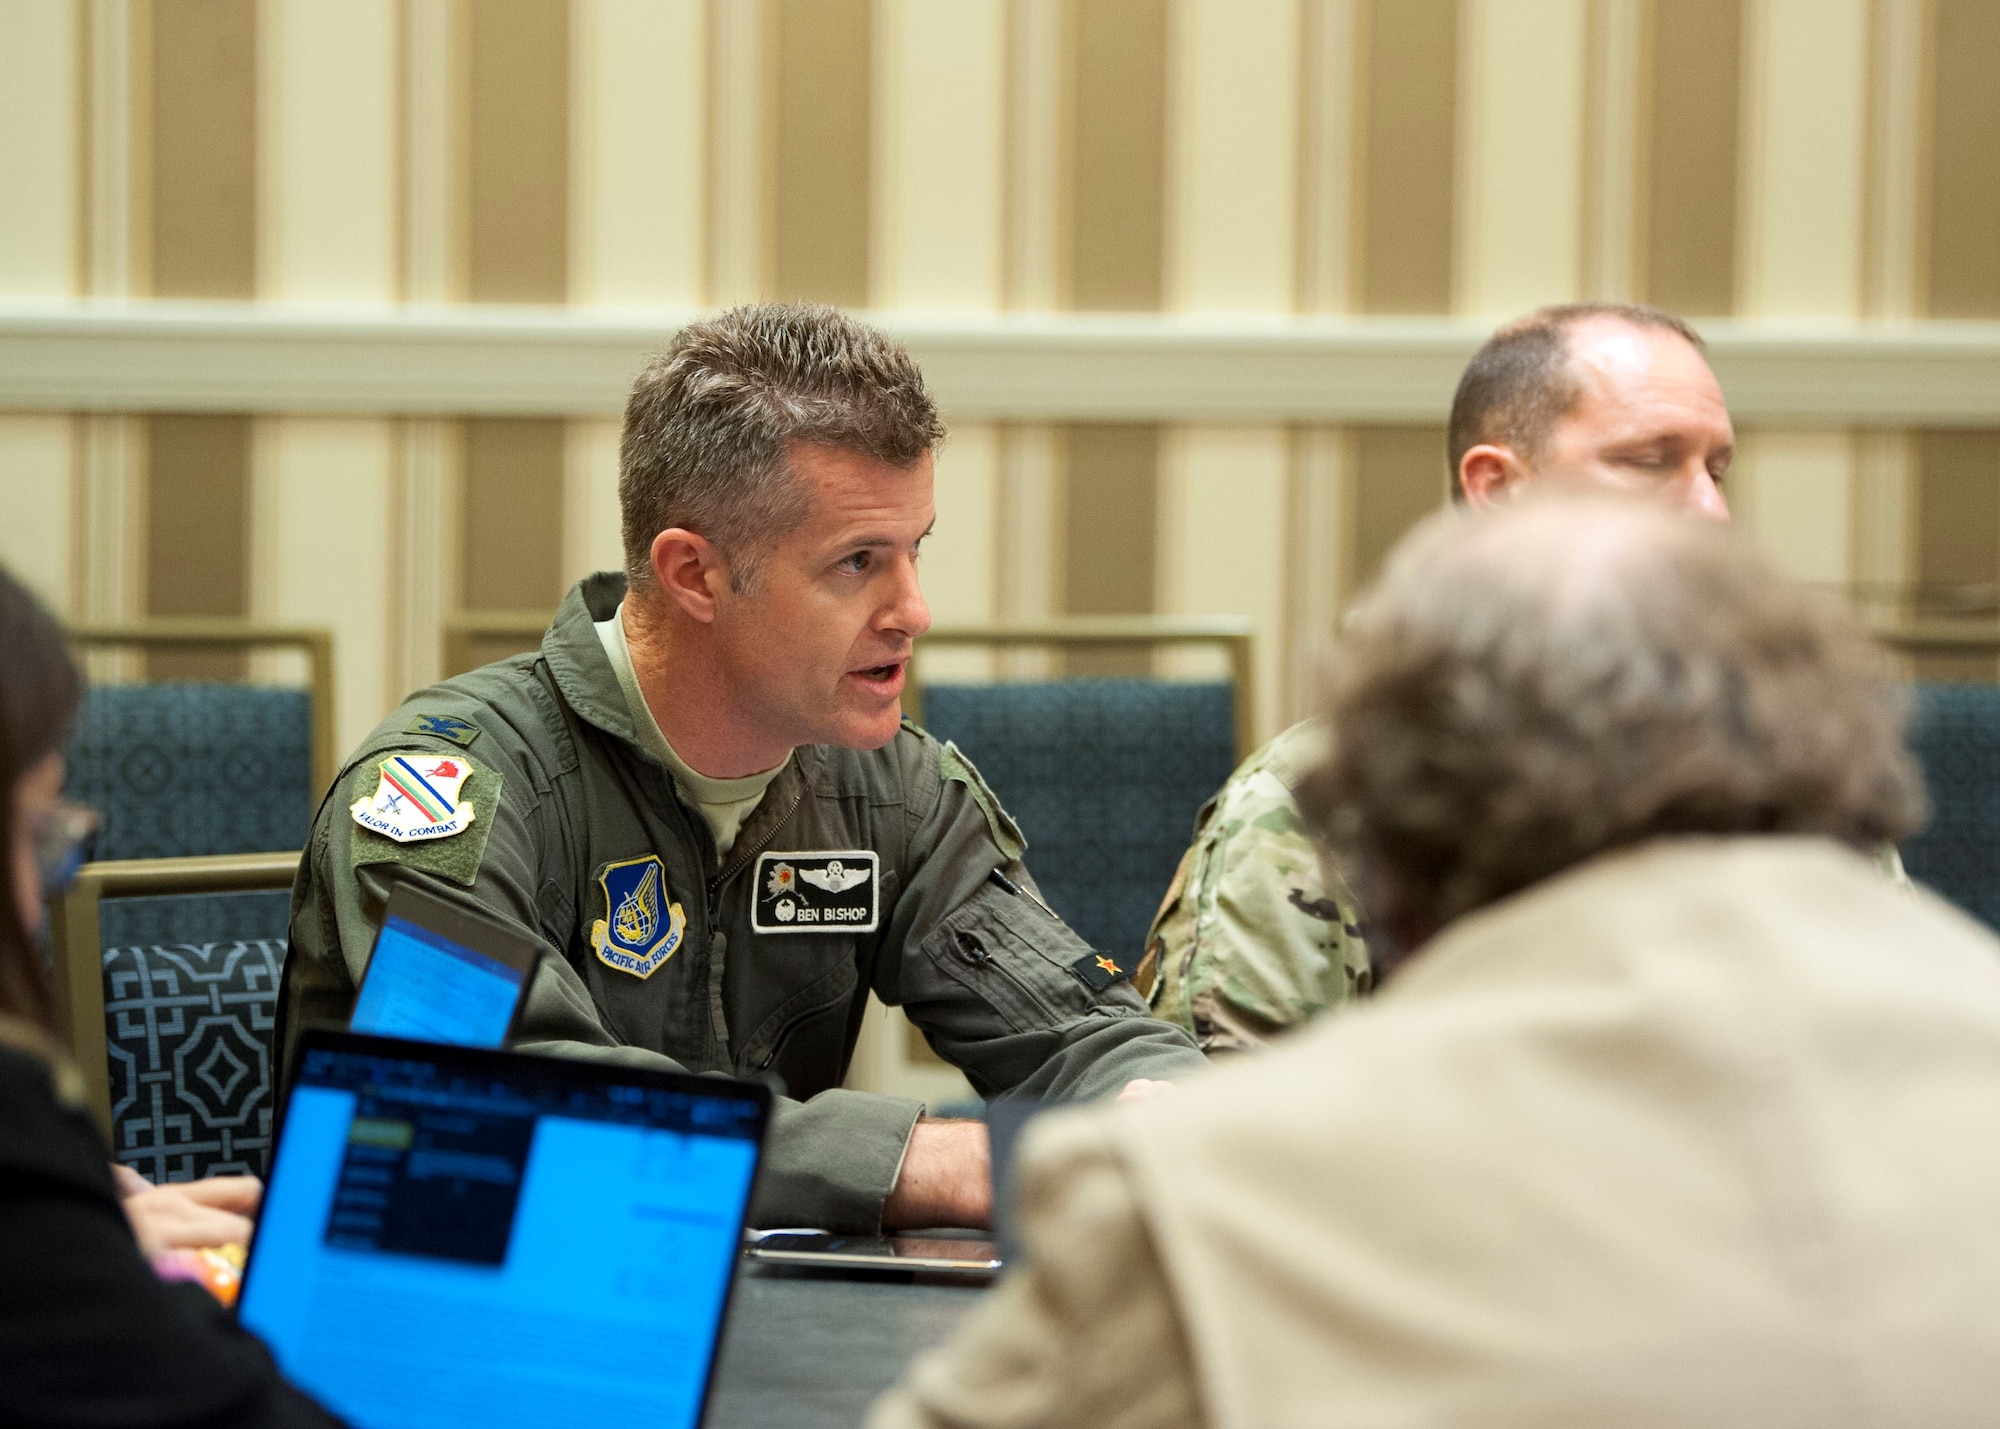 Col. Ben Bishop, 354th Fighter Wing commander at Eielson Air Force Base, Alaska, answers a question during a media roundtable at the Gaylord National Resort and Convention Center in National Harbor, Md., Sept. 17, 2019. Wing commanders from across Pacific Air Forces participated in the roundtable during the 2019 Air Force Association’s Air Space and Cyber Conference. (U.S. Air Force photo by Staff Sgt. Mikaley Kline)